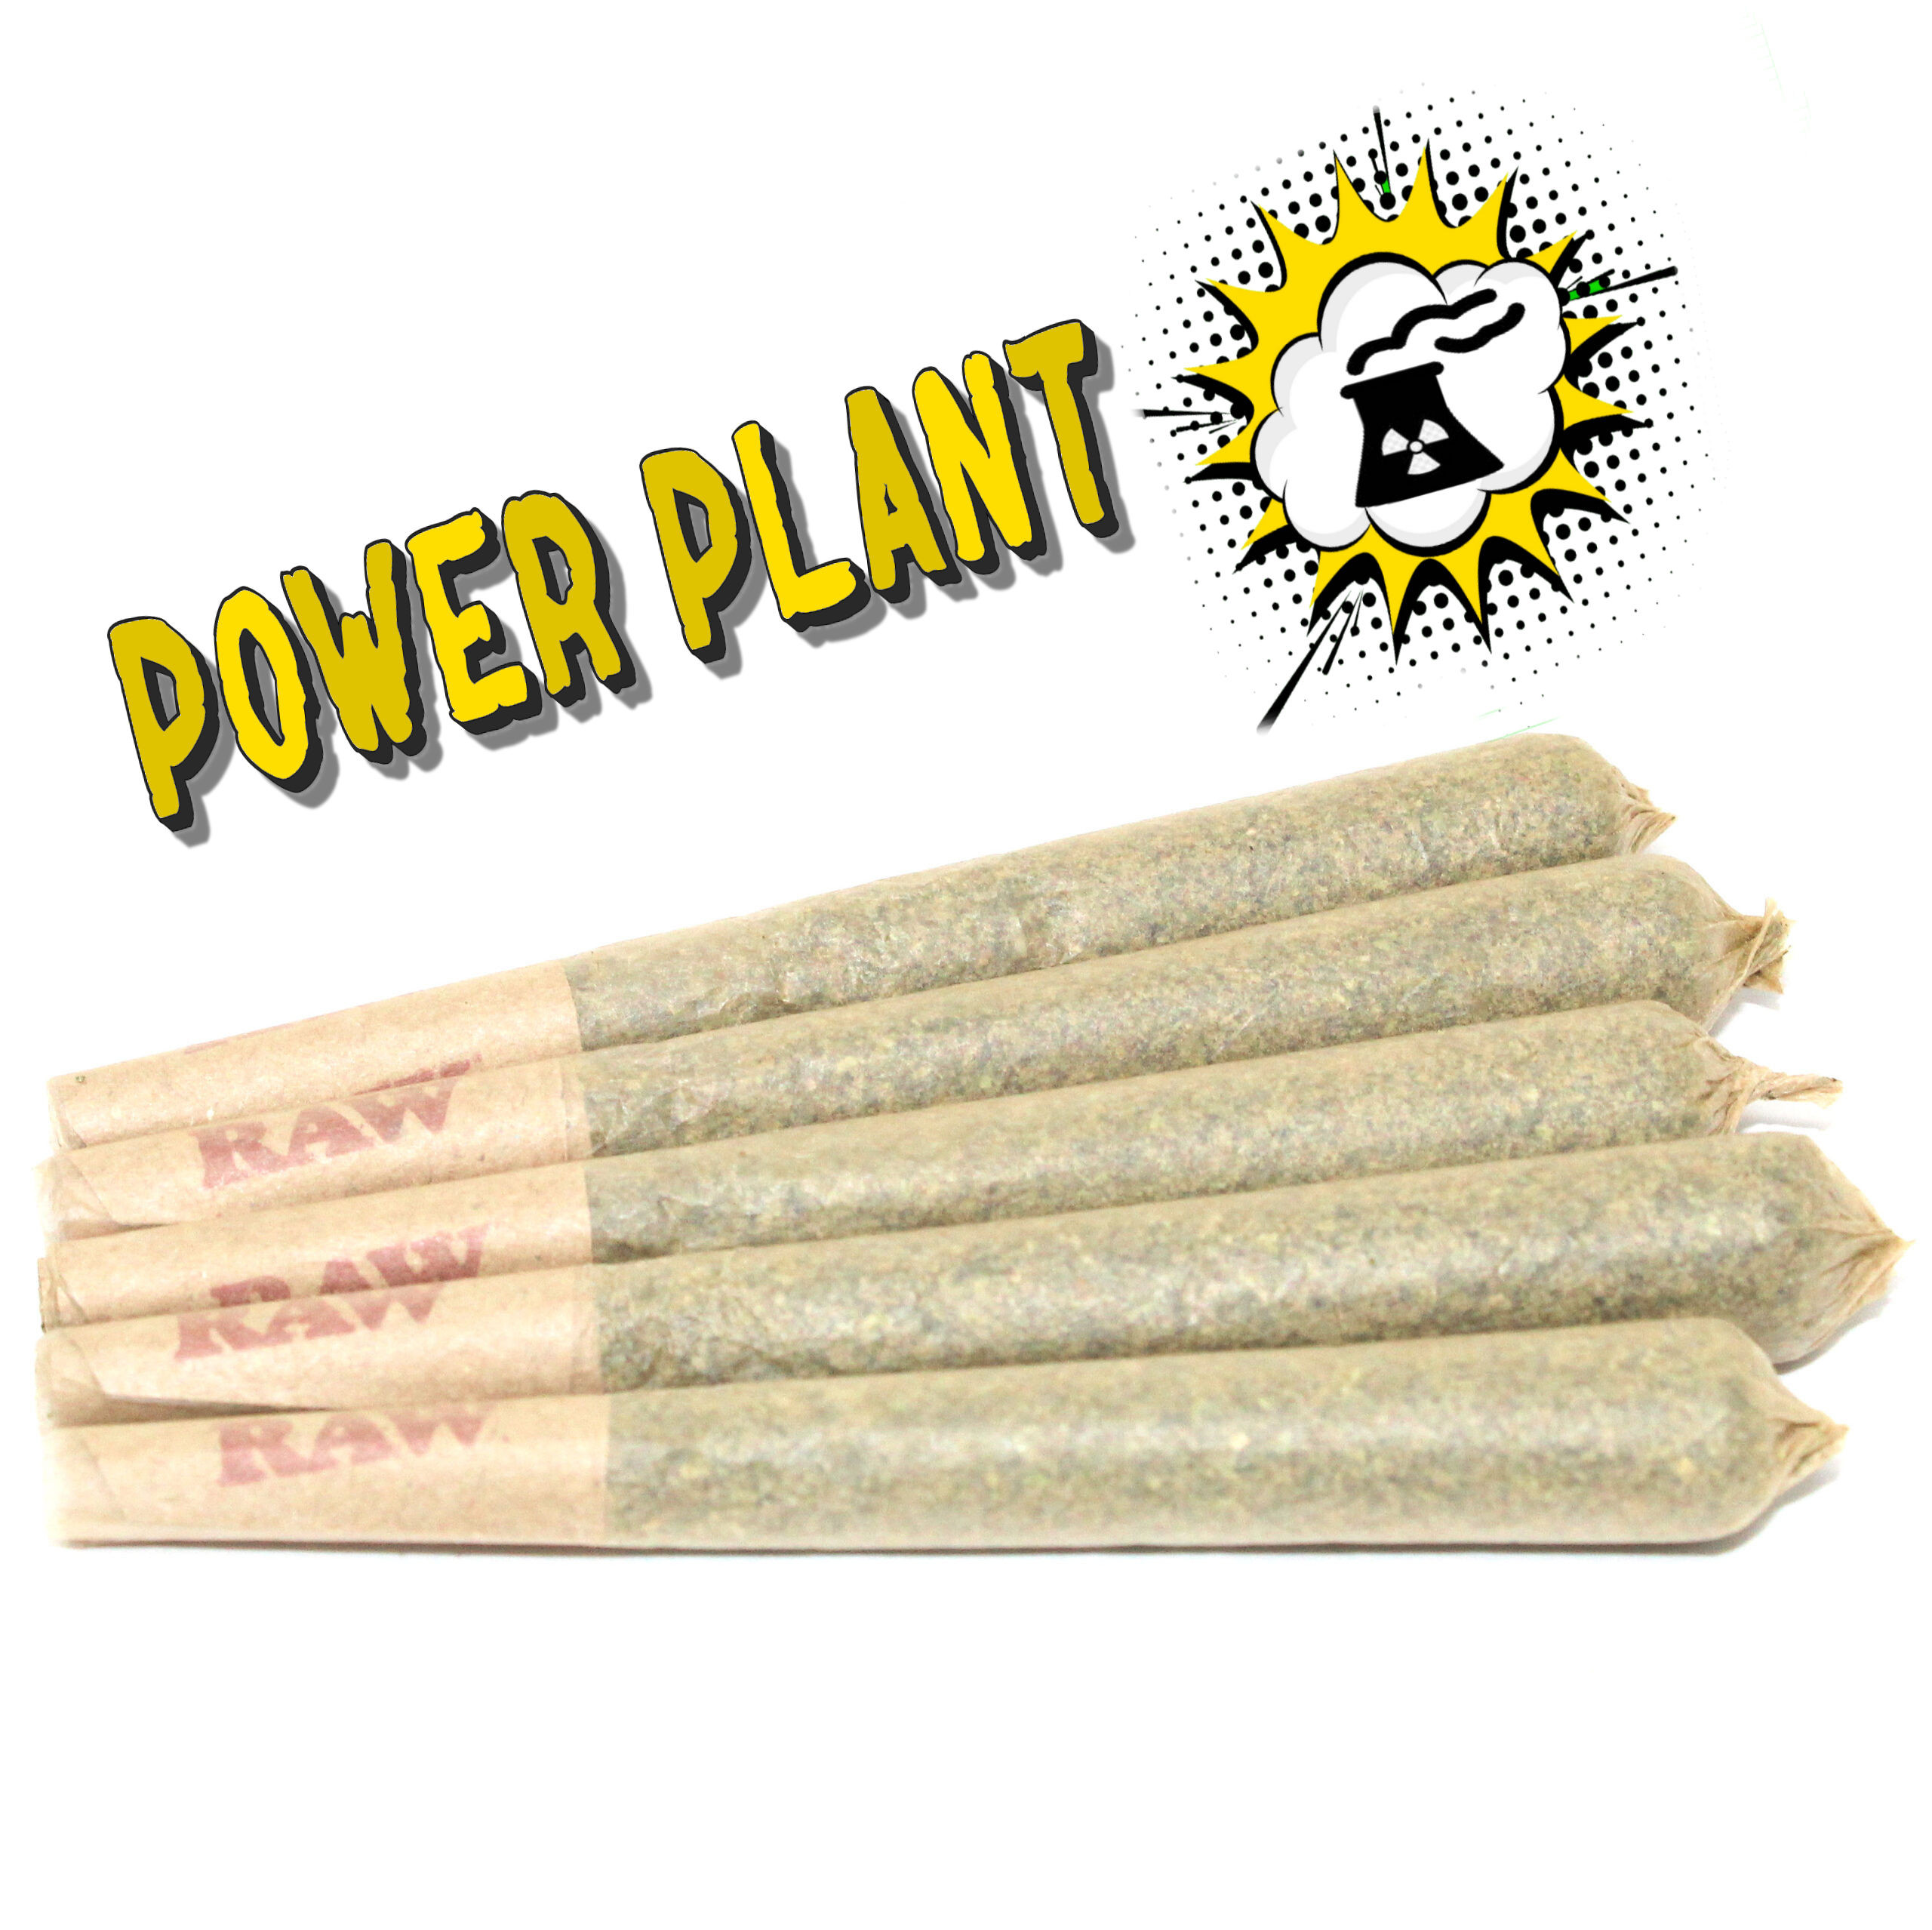 PRE-ROLLED JOINT - 'AAAA' POWER PLANT (2G)